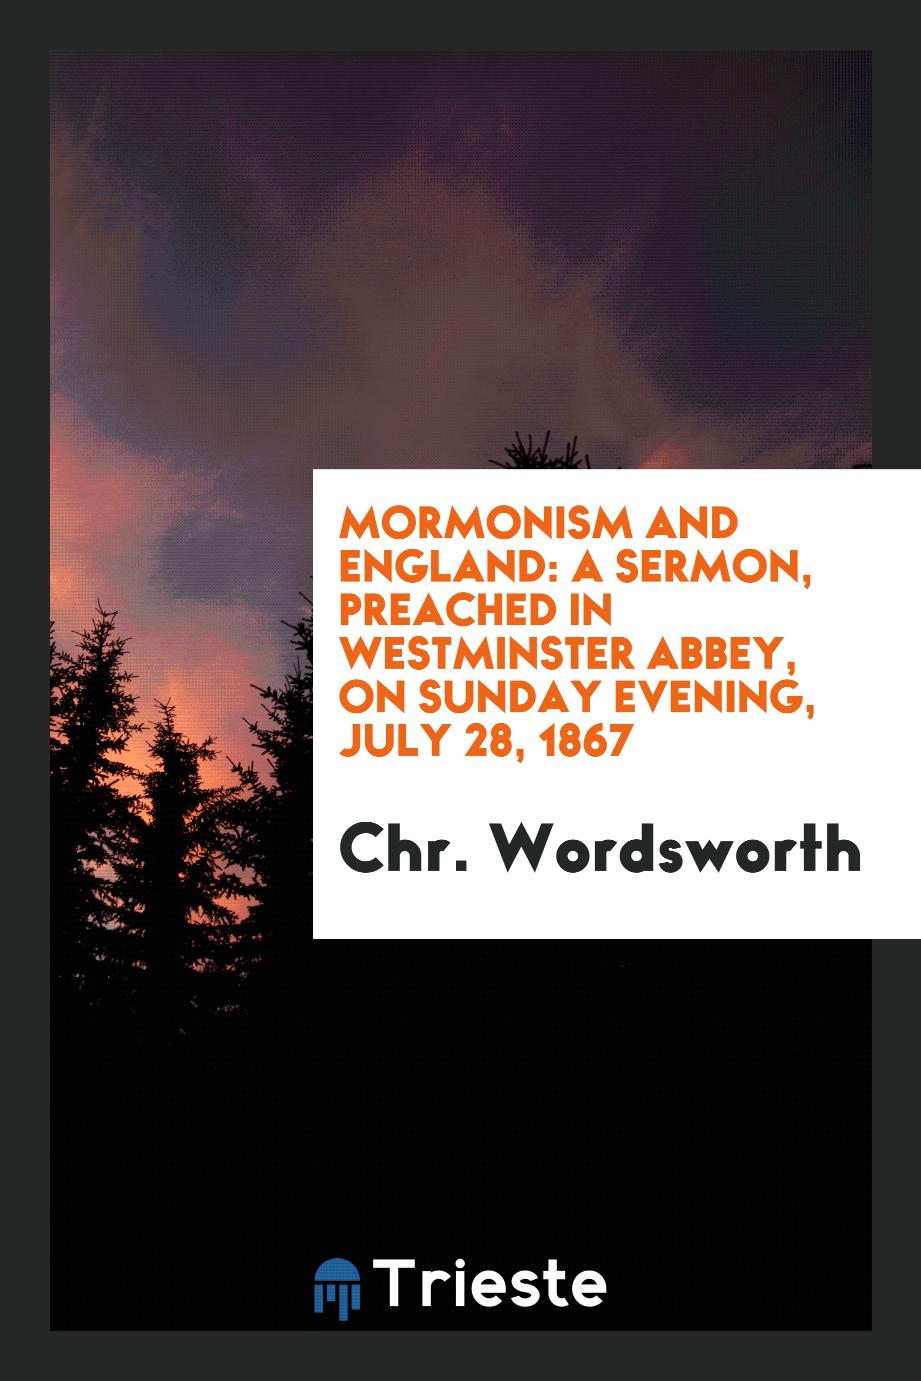 Mormonism and England: A Sermon, Preached in Westminster Abbey, on Sunday Evening, July 28, 1867